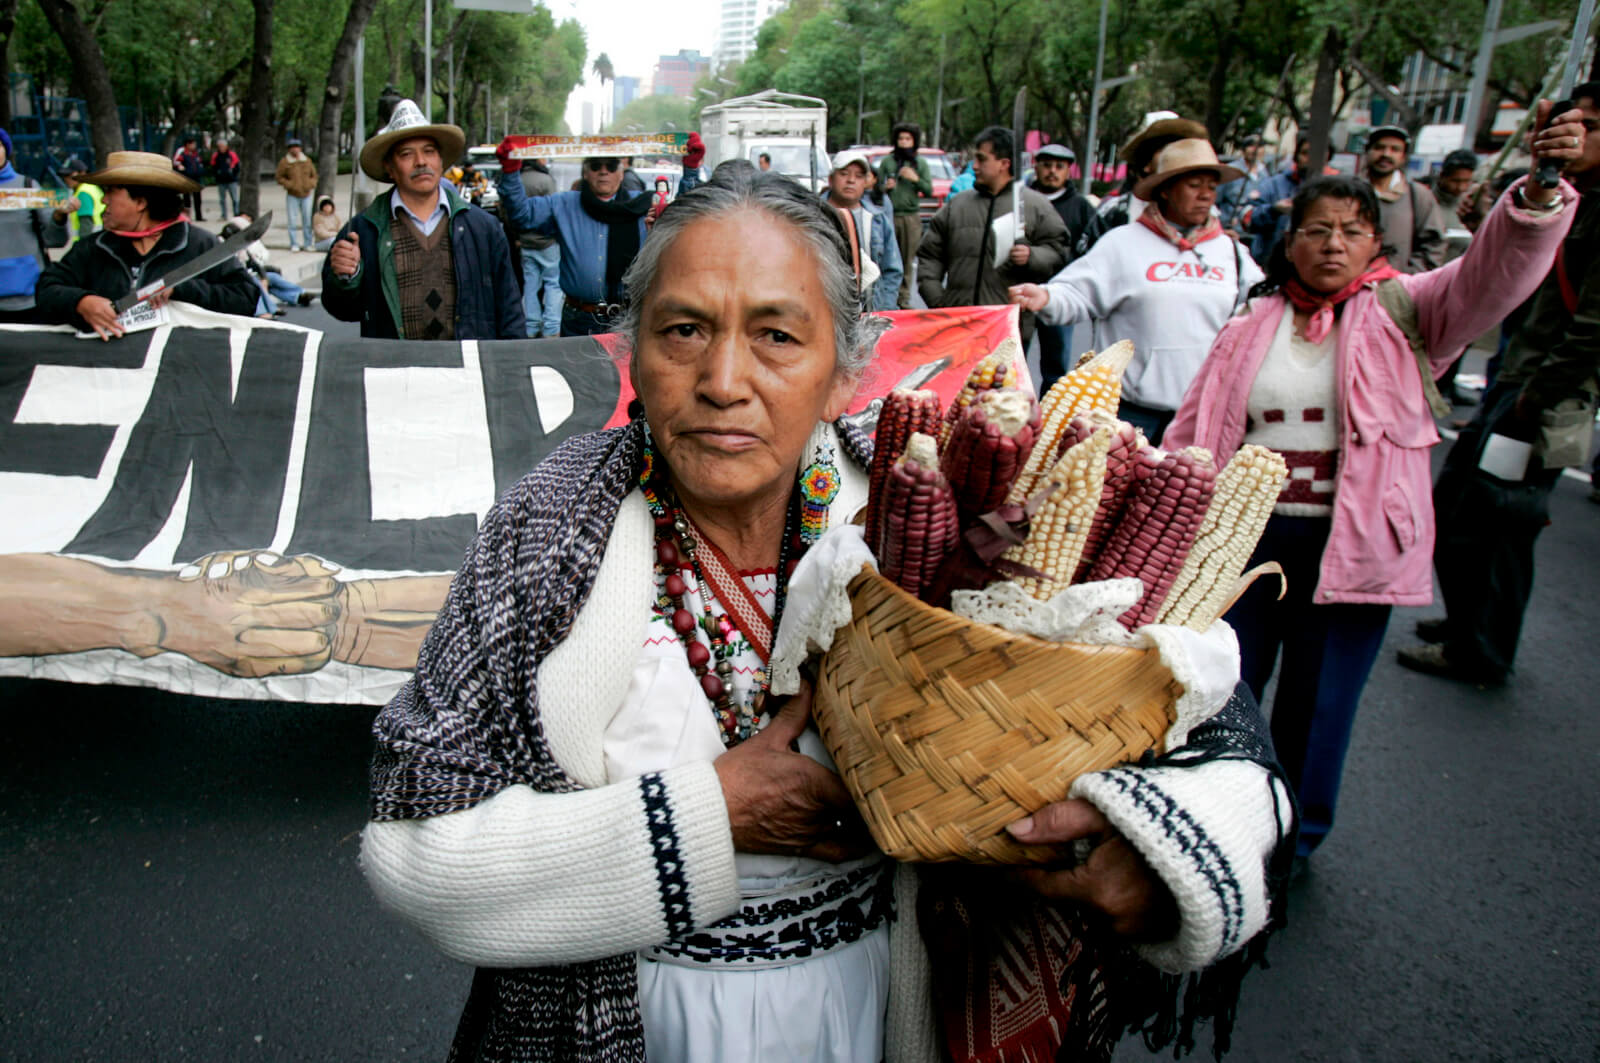 Mexican farmers protest the end of import protections under NAFTA for corn and bean crops in Mexico City, Jan. 2, 2008. Eduardo Verdugo | AP